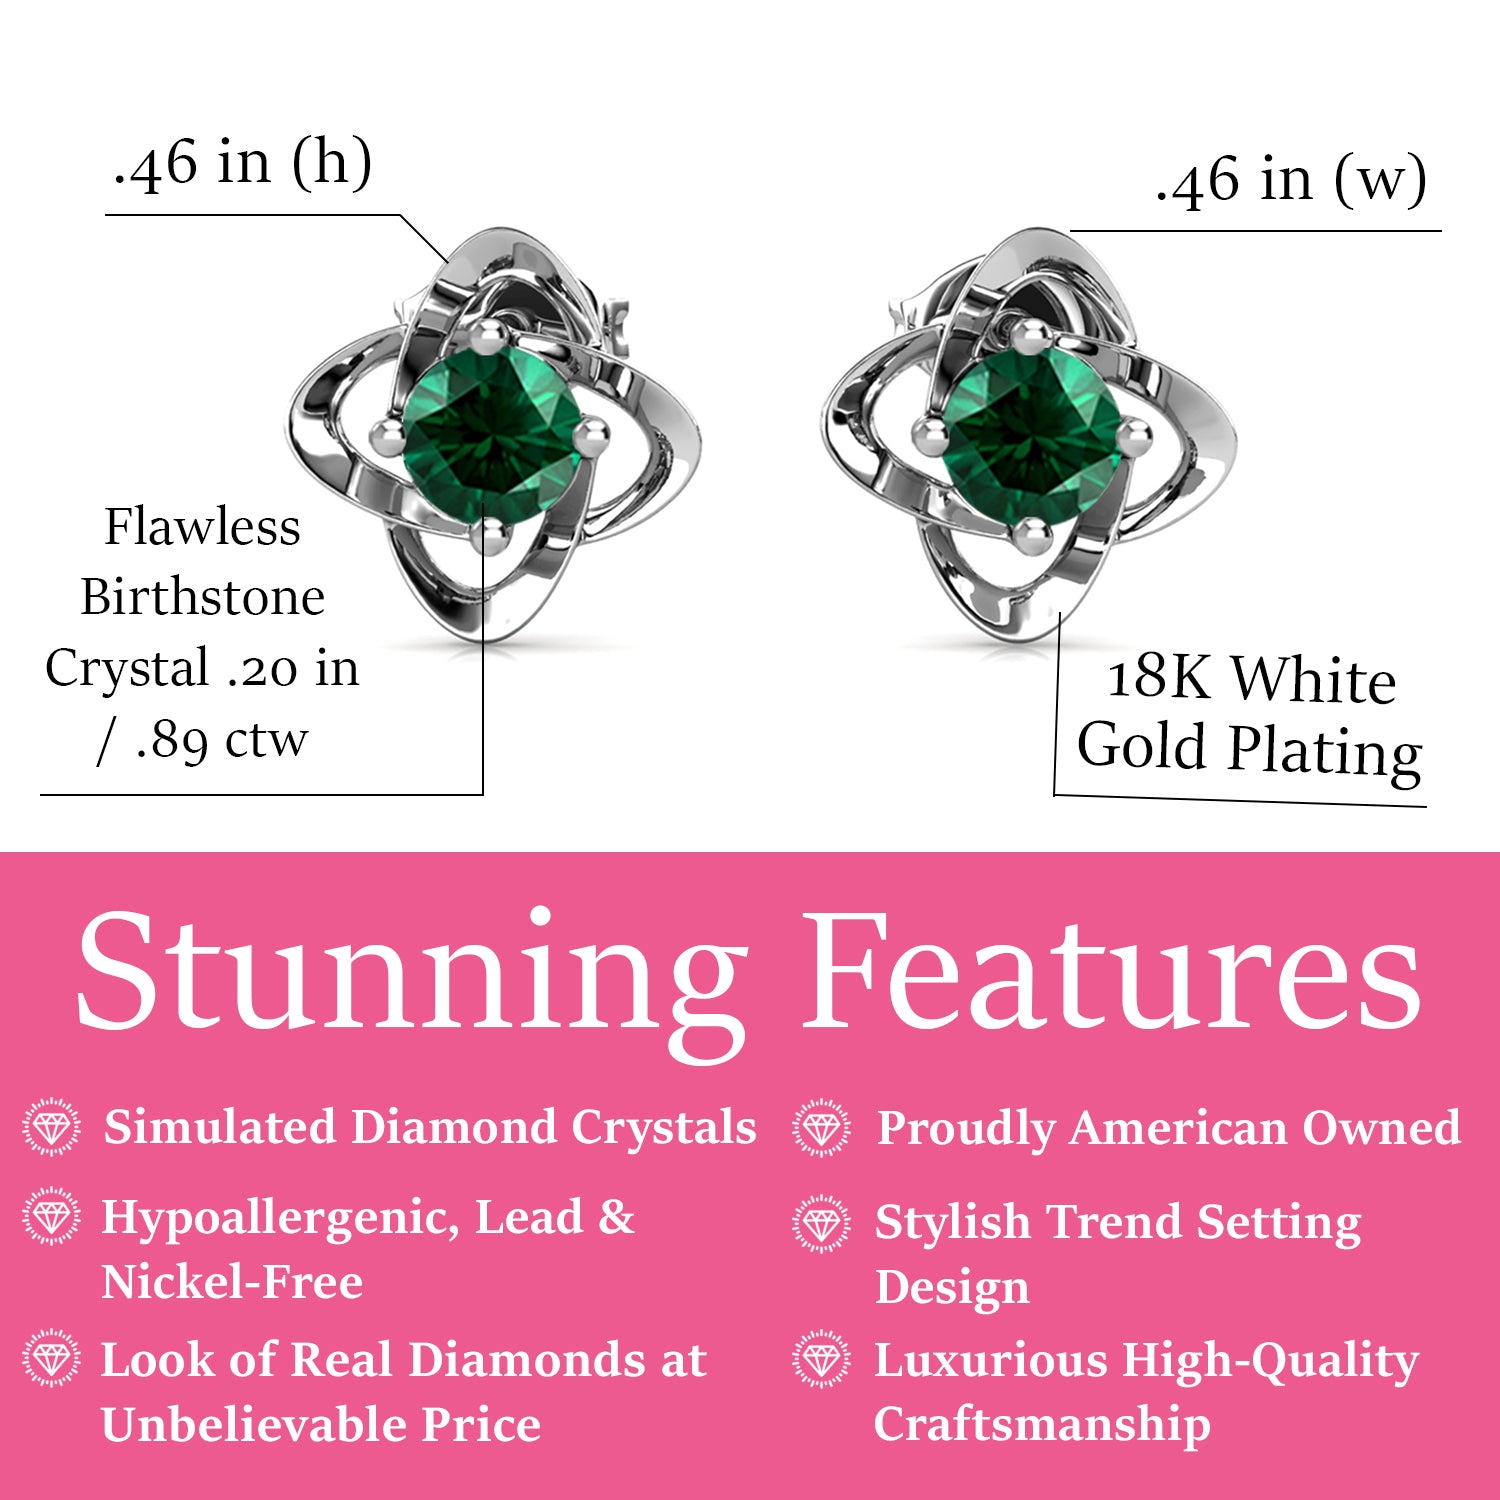 Infinity May Birthstone Emerald Earrings, 18k White Gold Plated Silver Birthstone Earrings with Crystals